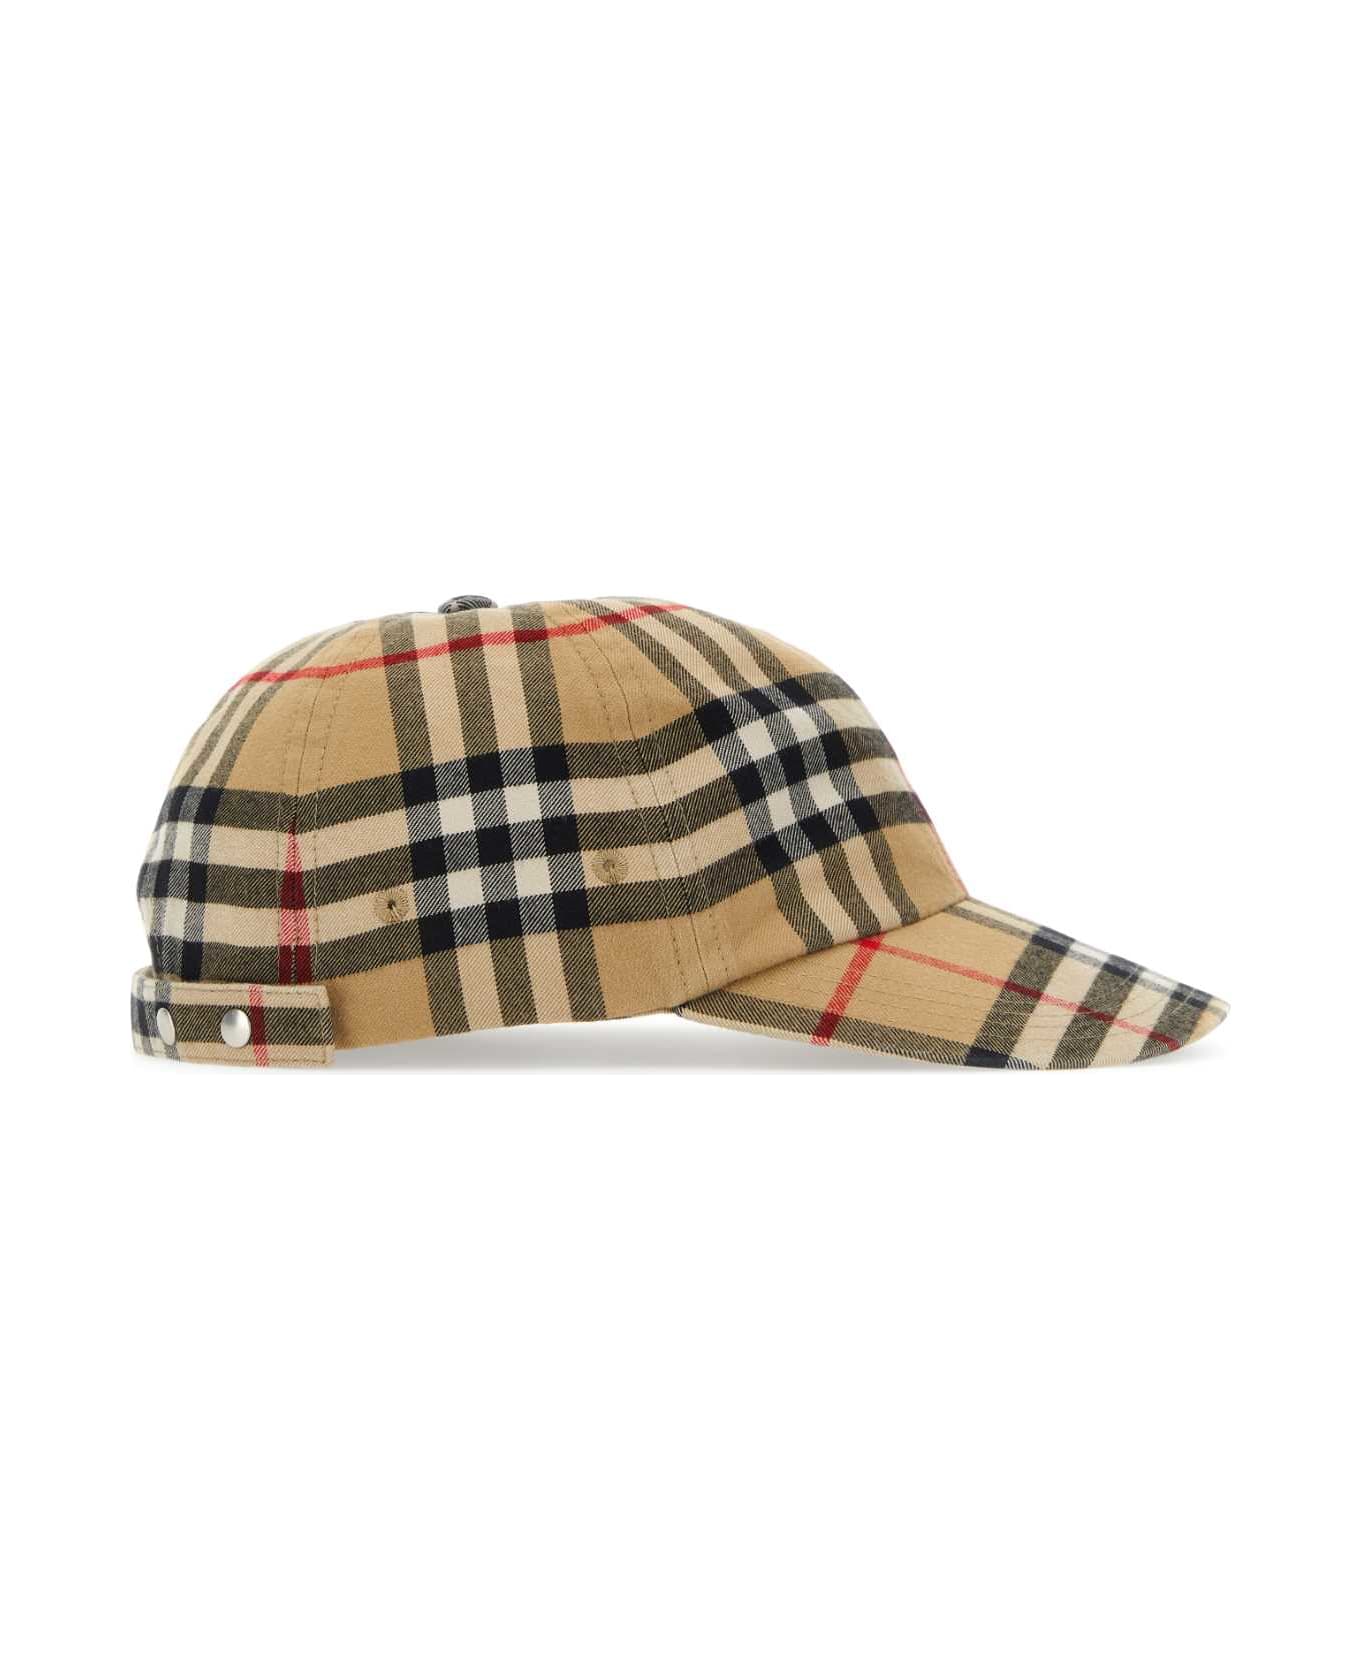 Burberry Embroidered Cotton Baseball Cap - ARCHIVEBEIGE